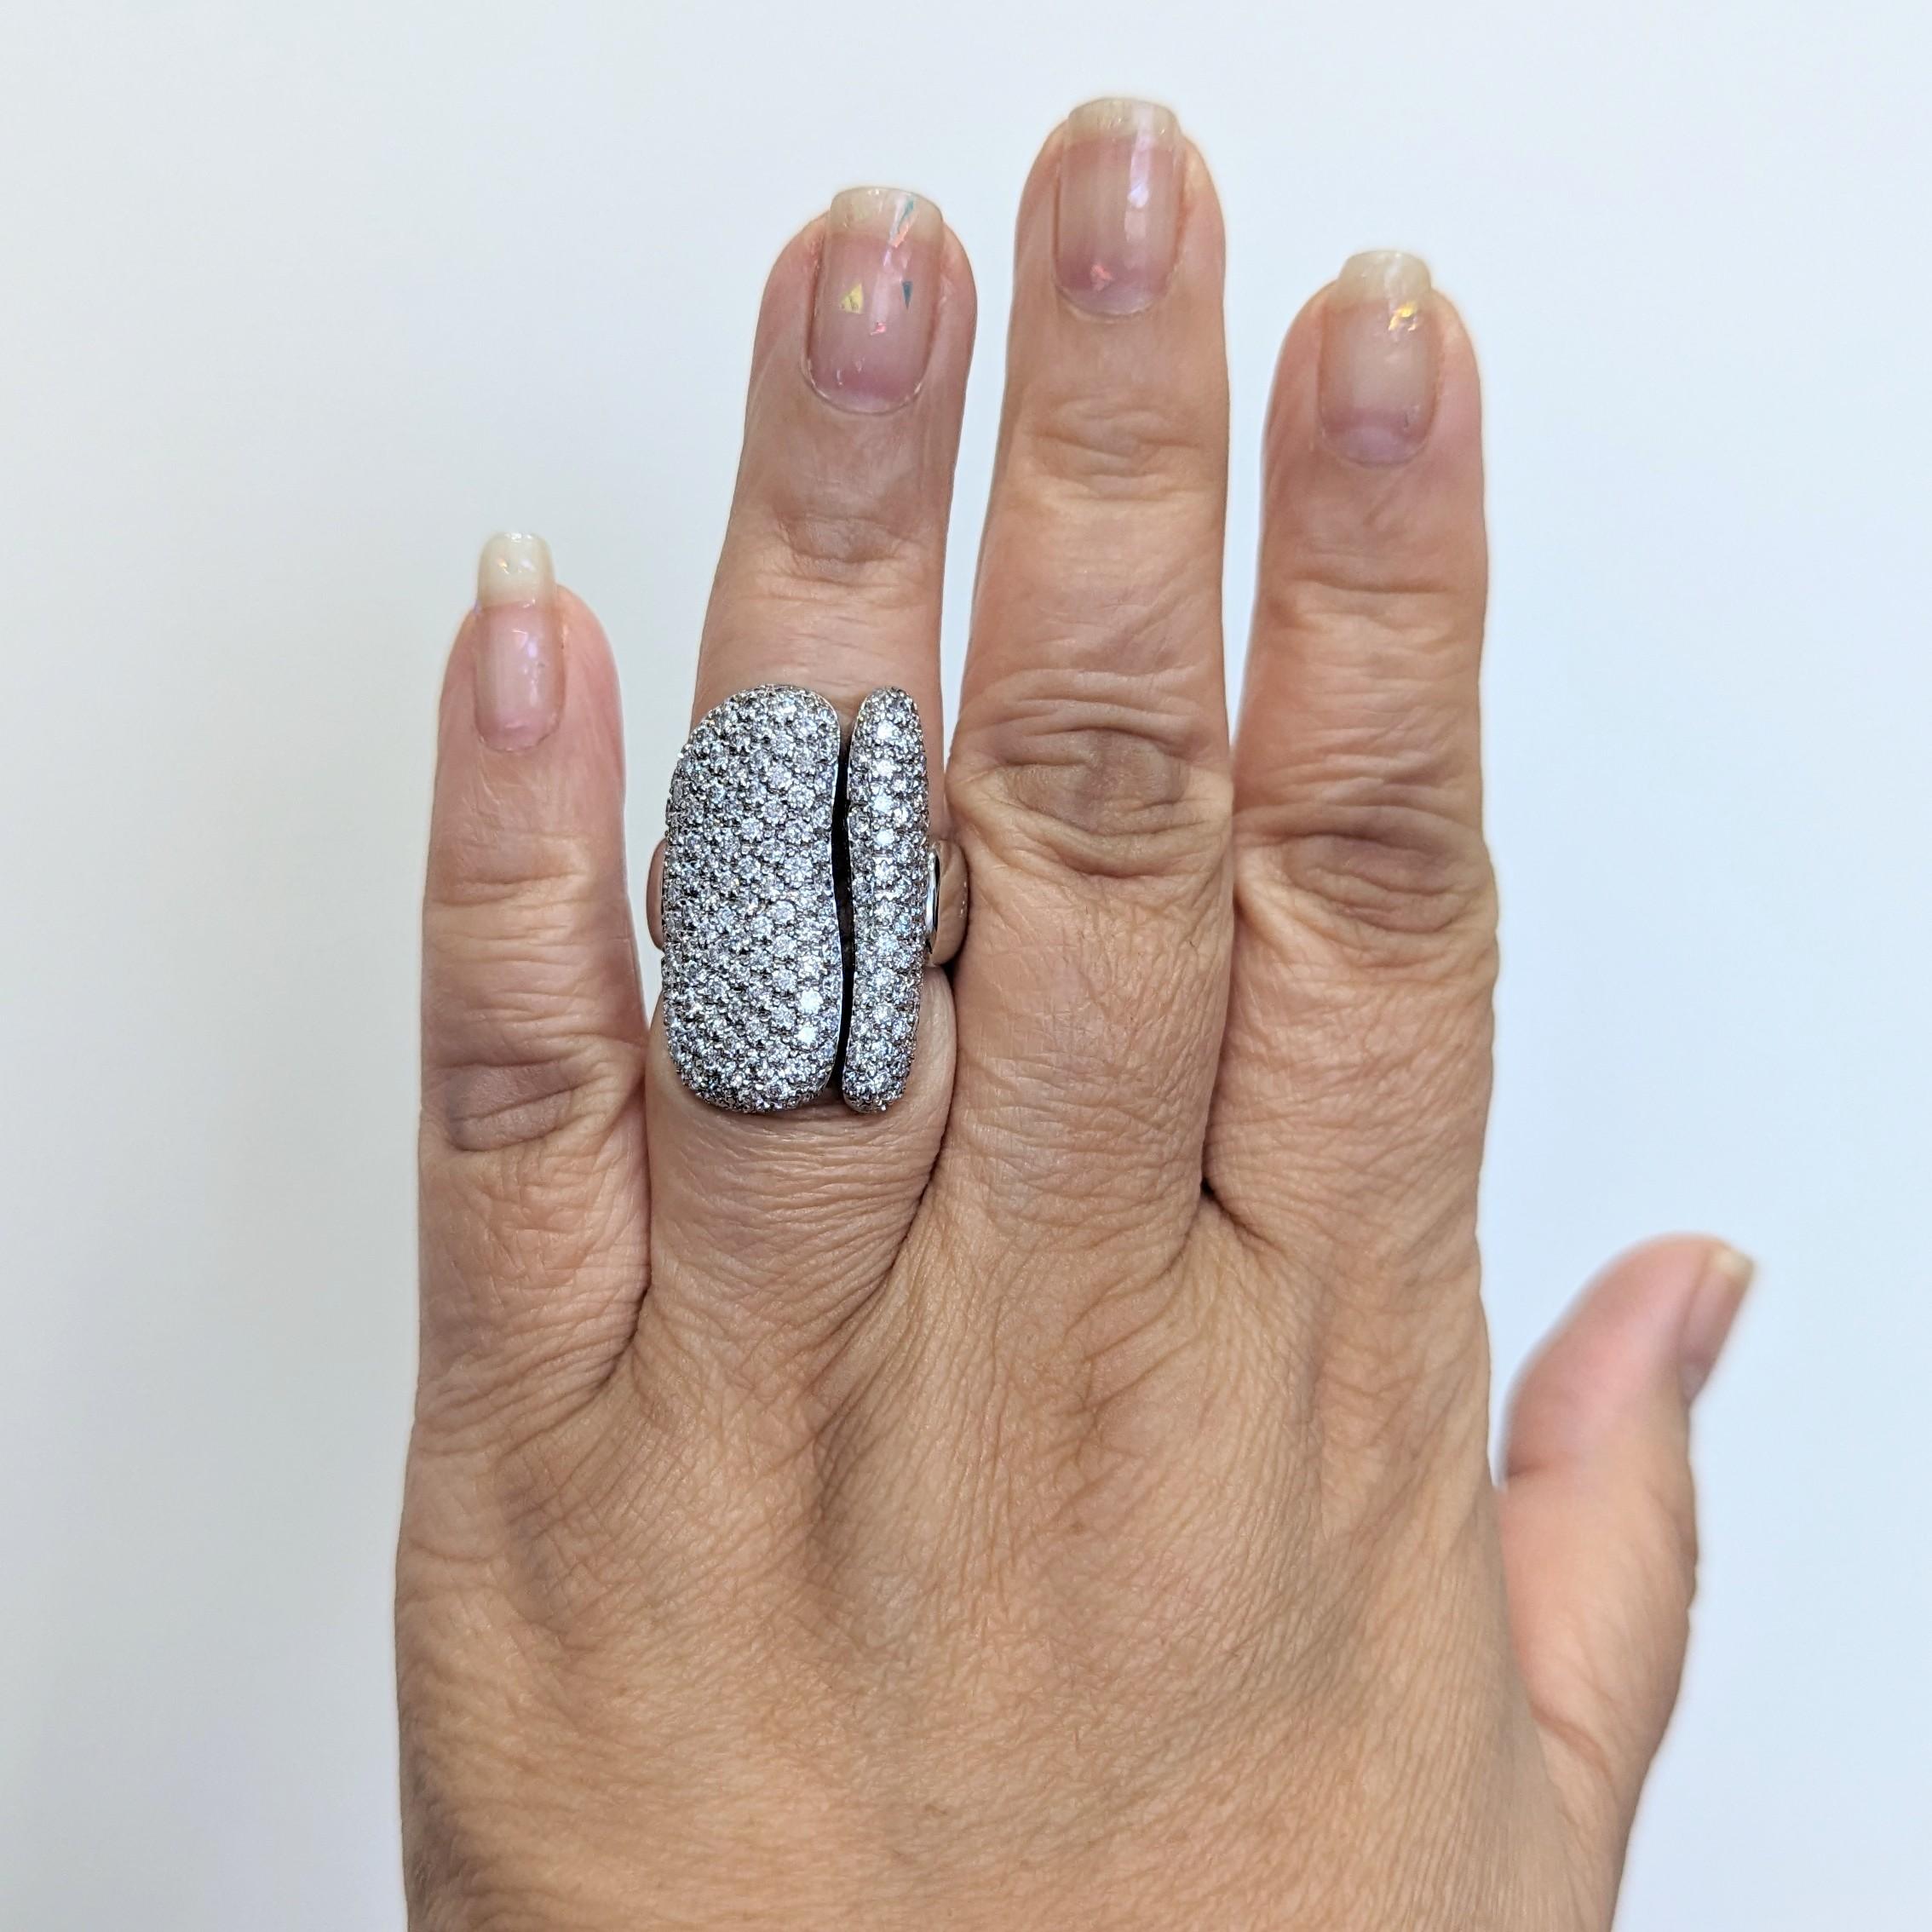 Beautiful 3.00 ct. good quality, white, and bright diamond rounds in this pave design estate Antonini ring.  Handmade in 18k white gold.  Ring size 7.25.